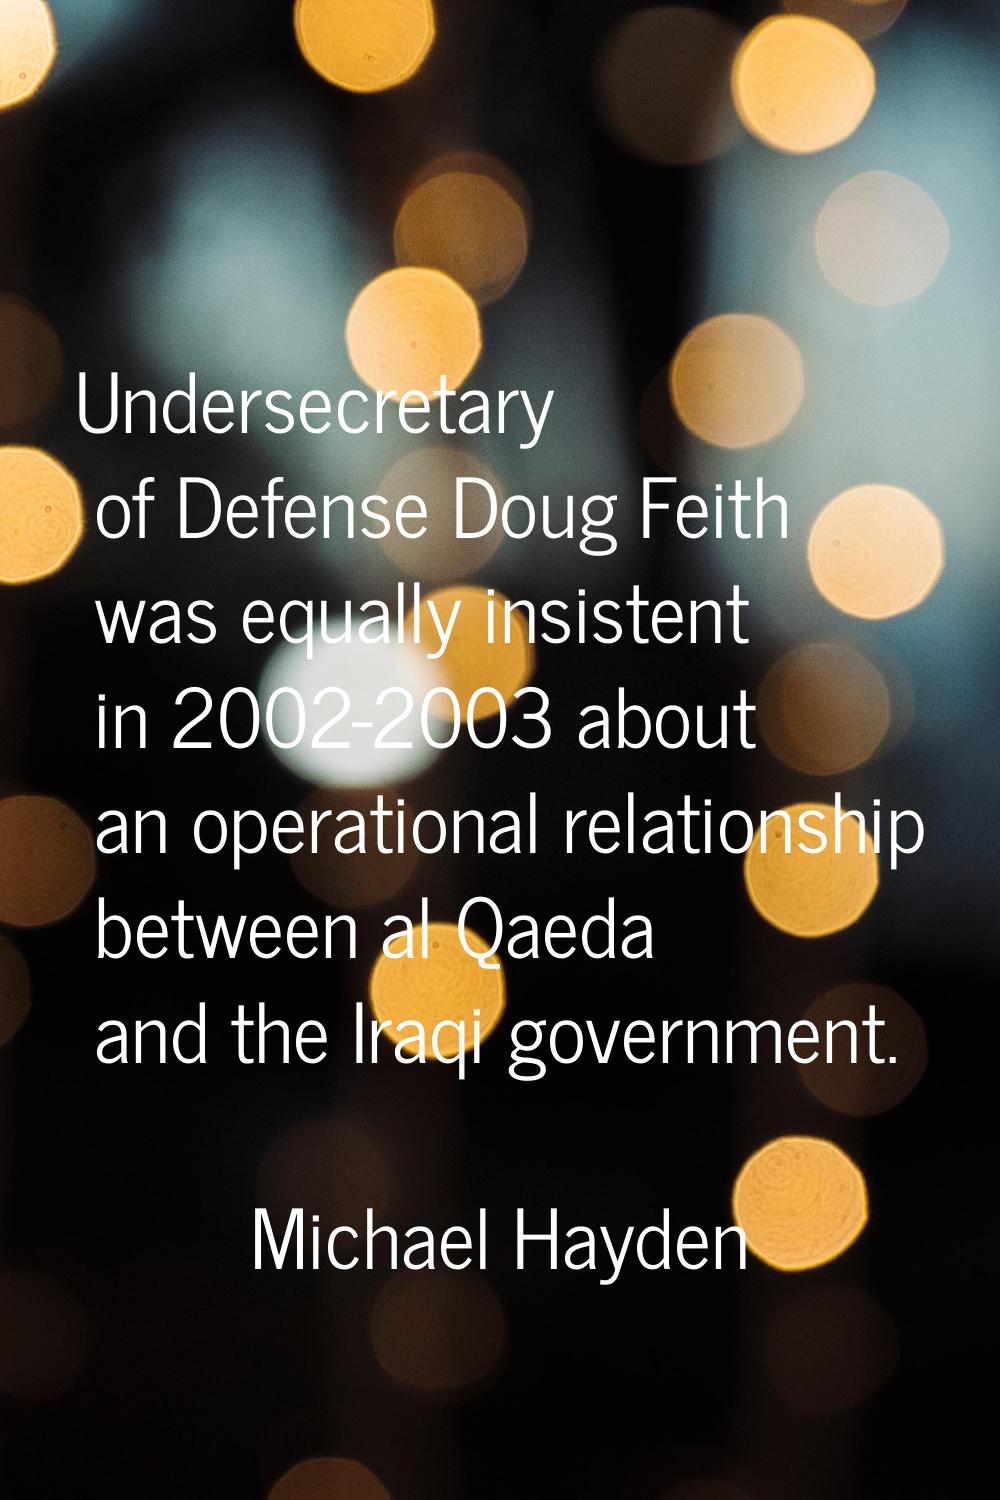 Undersecretary of Defense Doug Feith was equally insistent in 2002-2003 about an operational relati